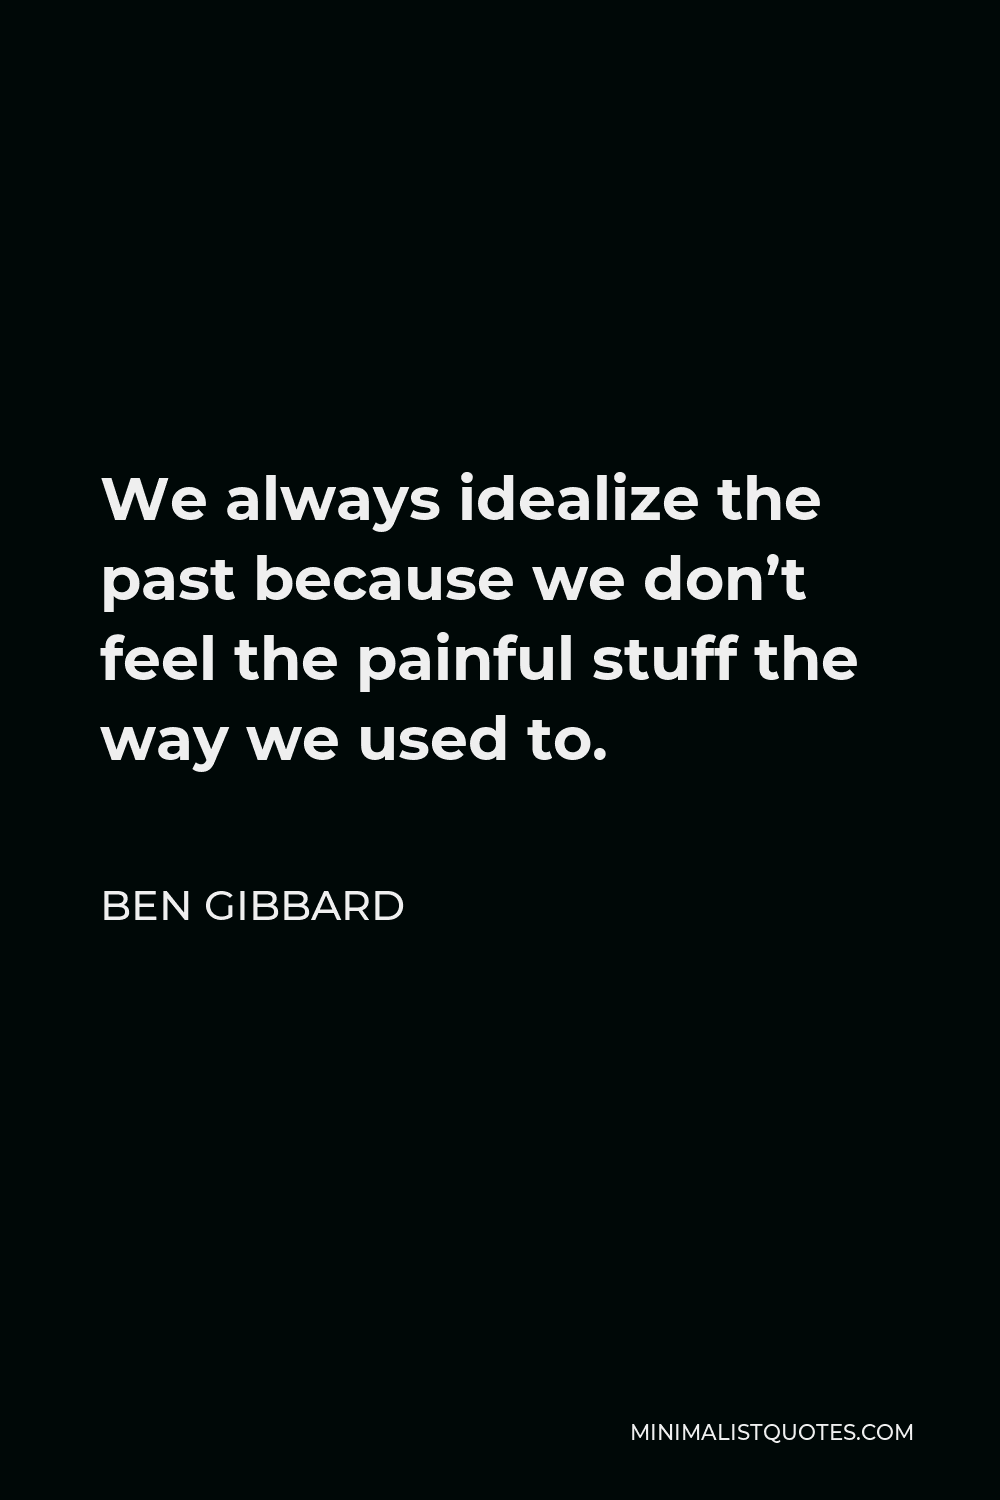 Ben Gibbard Quote - We always idealize the past because we don’t feel the painful stuff the way we used to.